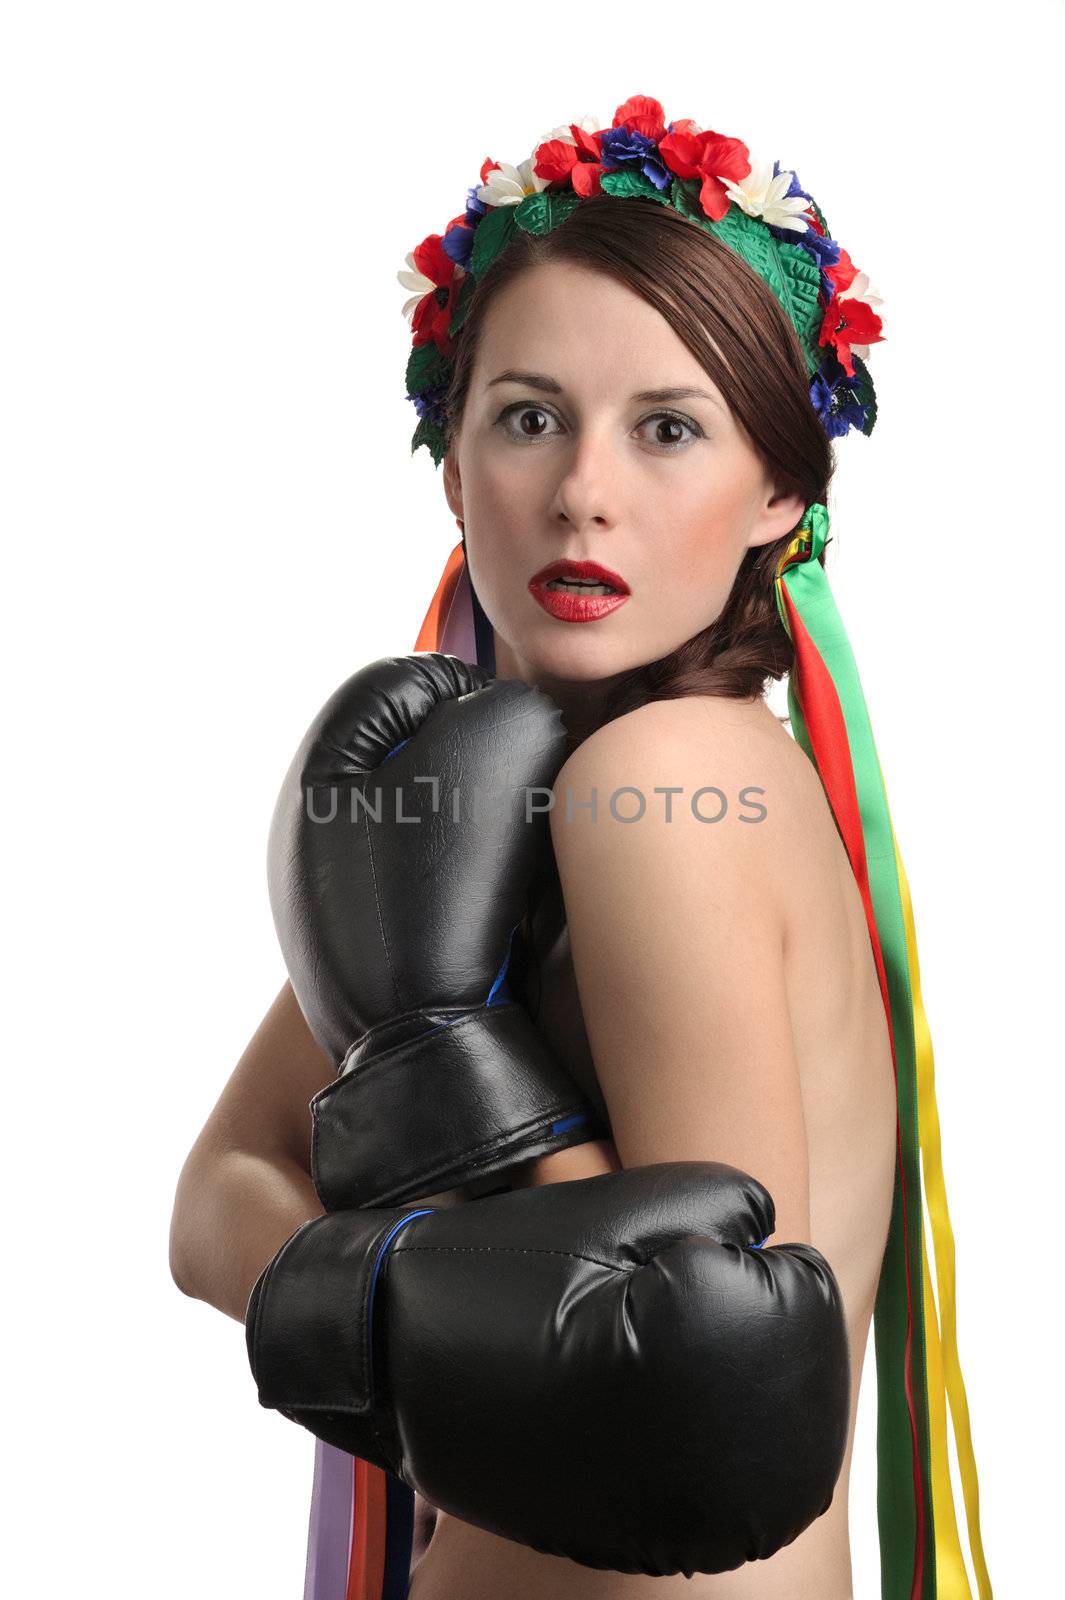 Frightened woman with boxing gloves by kirs-ua